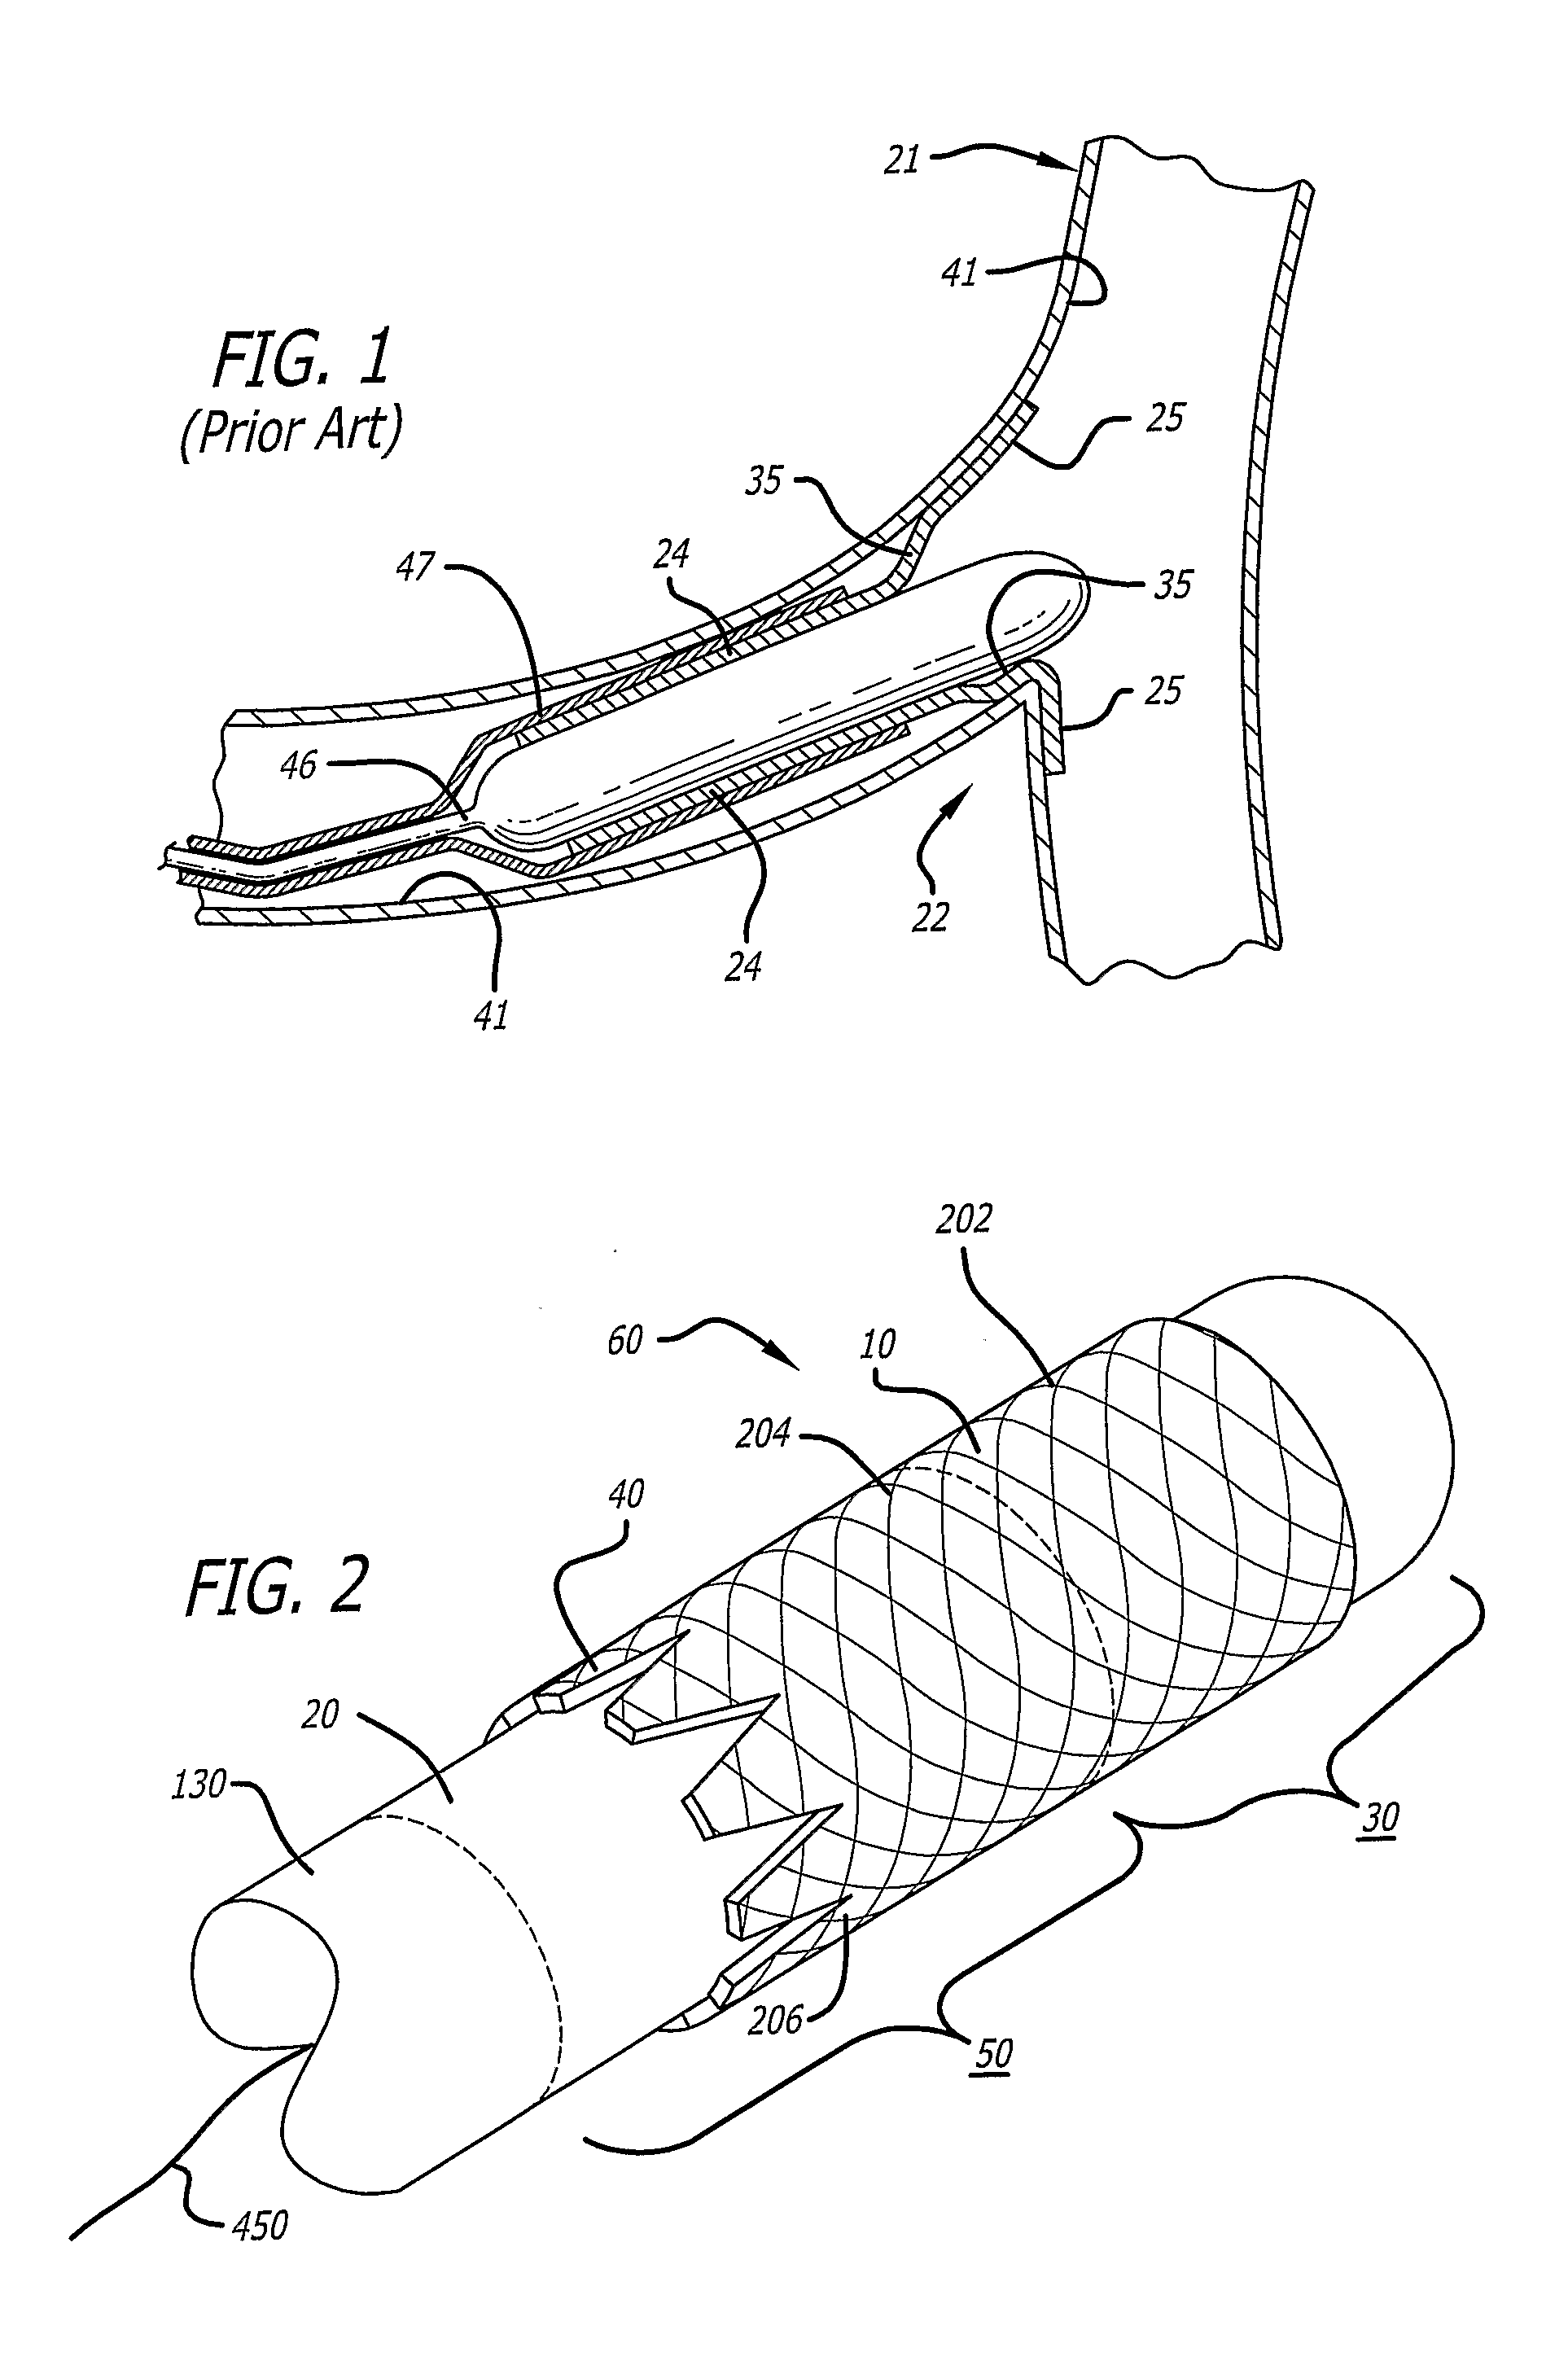 System and method for deploying a proximally-flaring stent